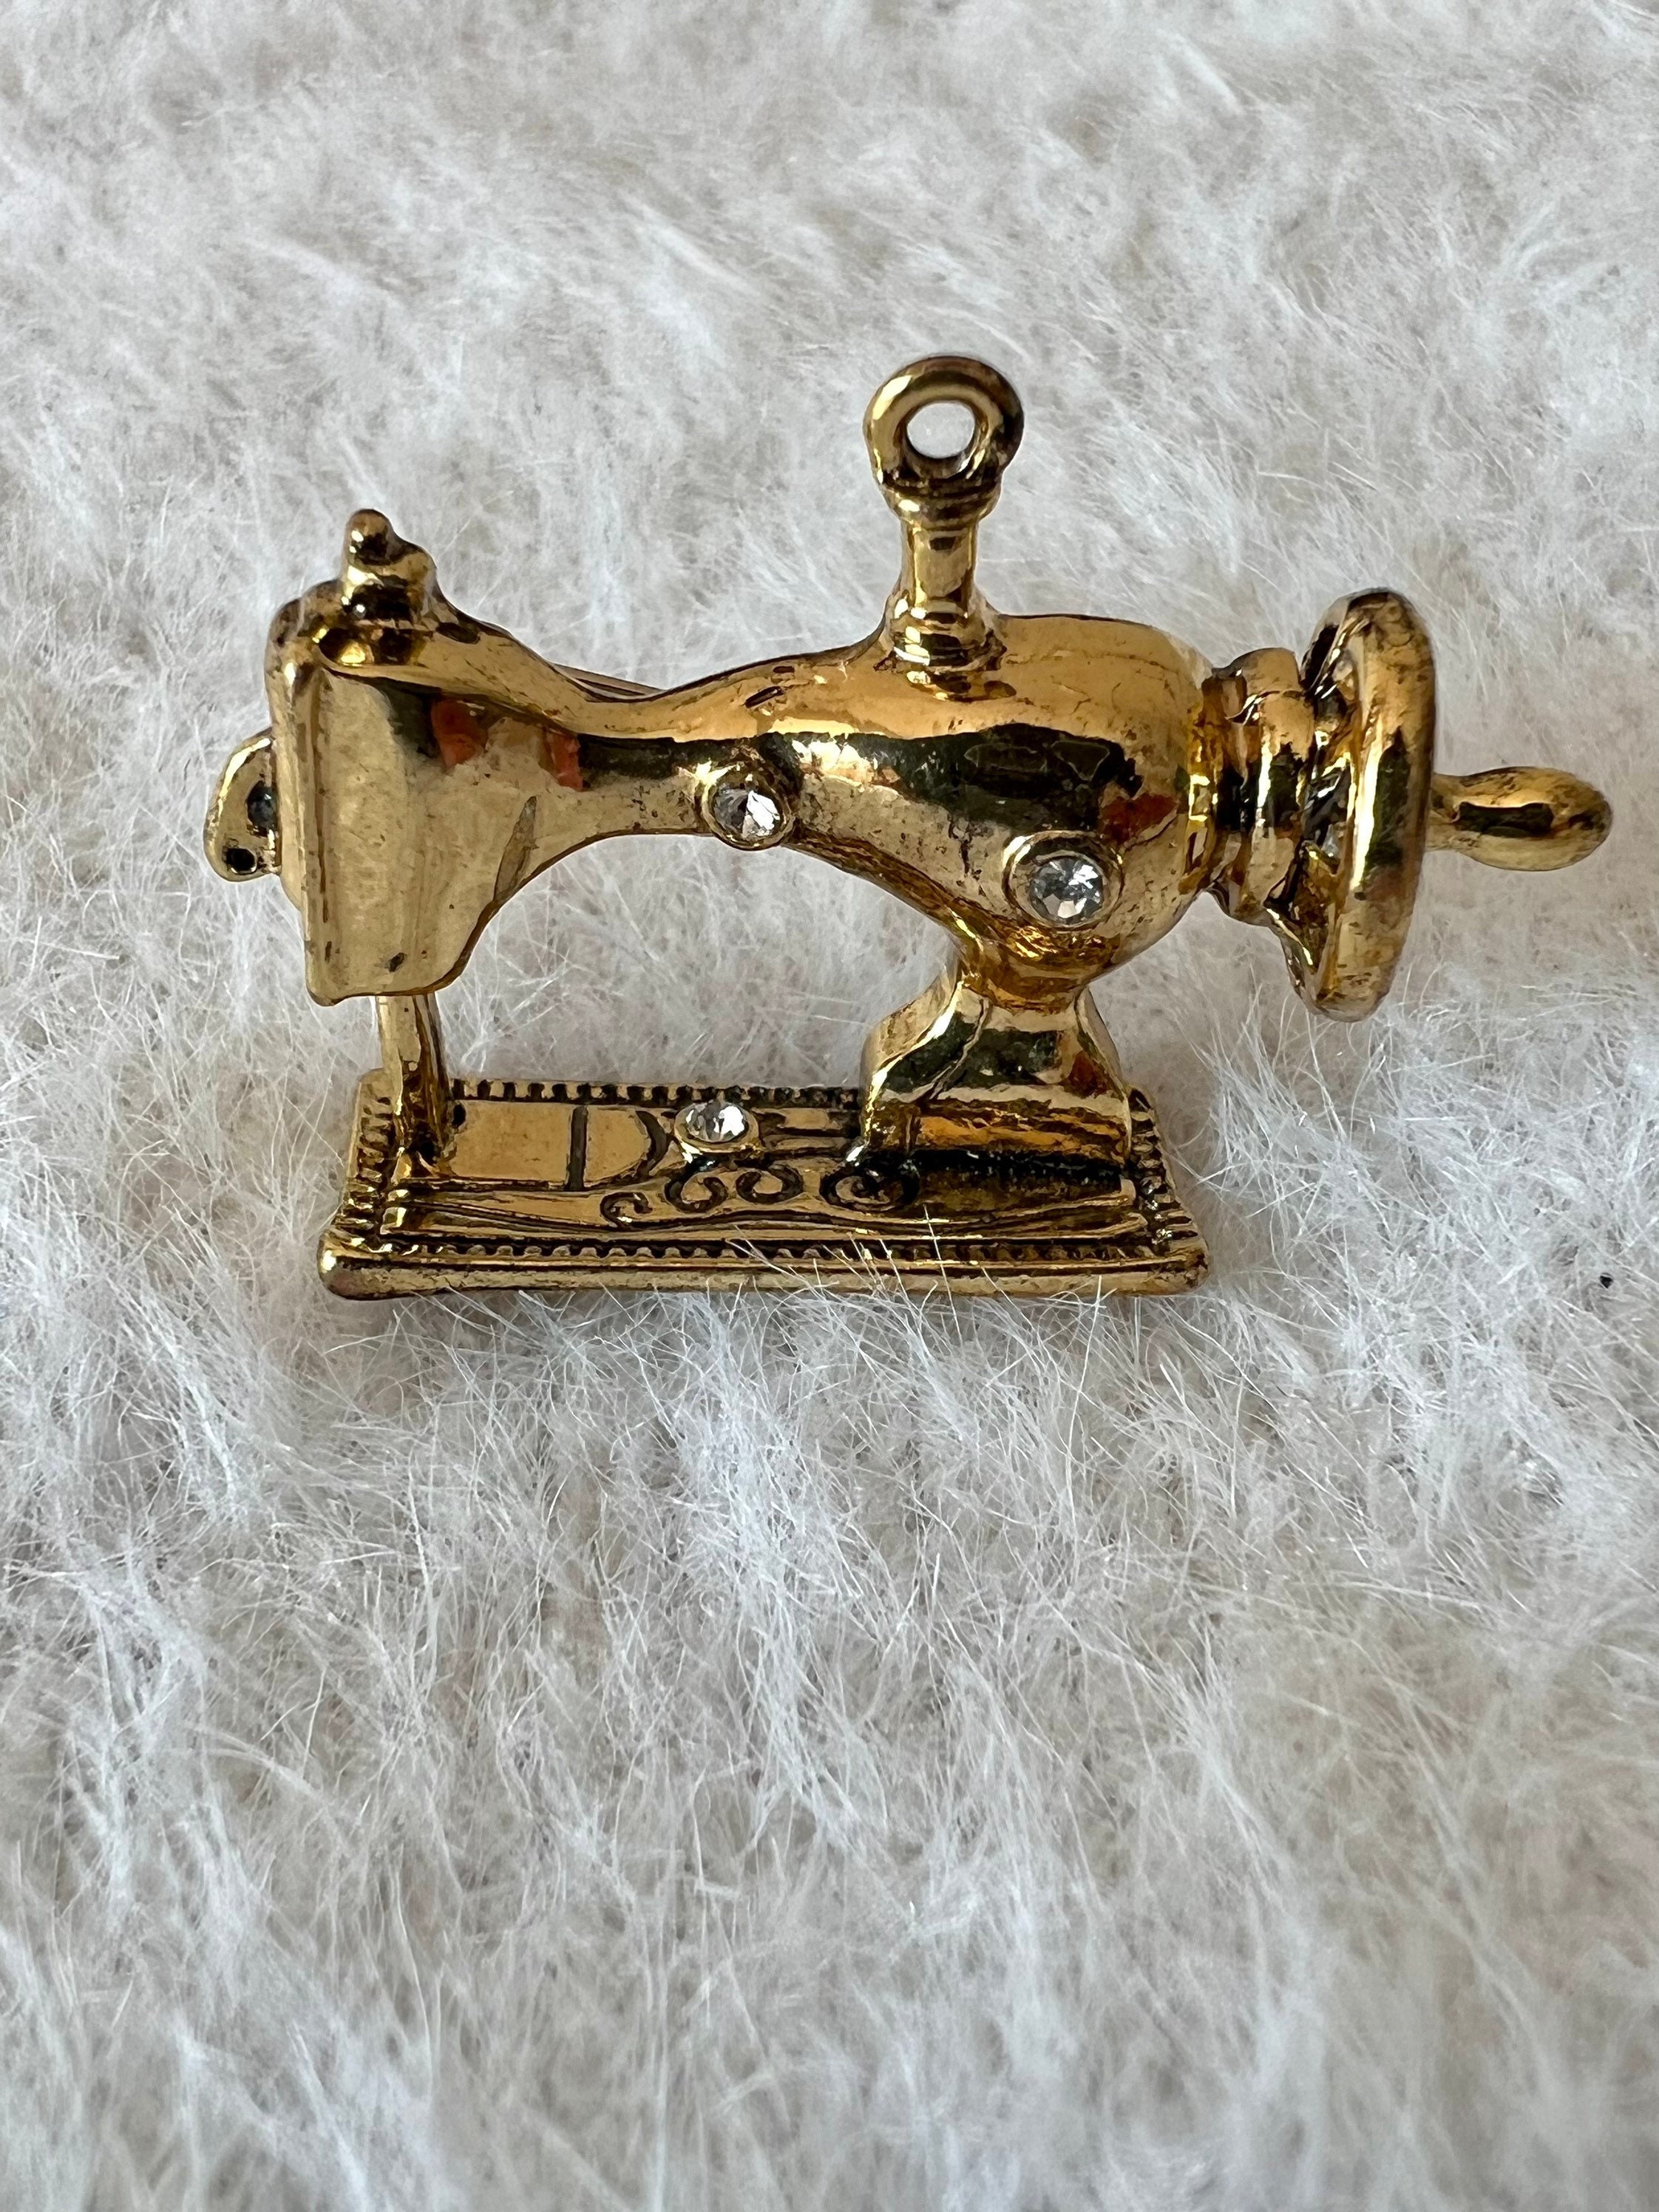 LIUCM Sewing Machine Shape Brooch Pin Clothing Decoration Accessory 